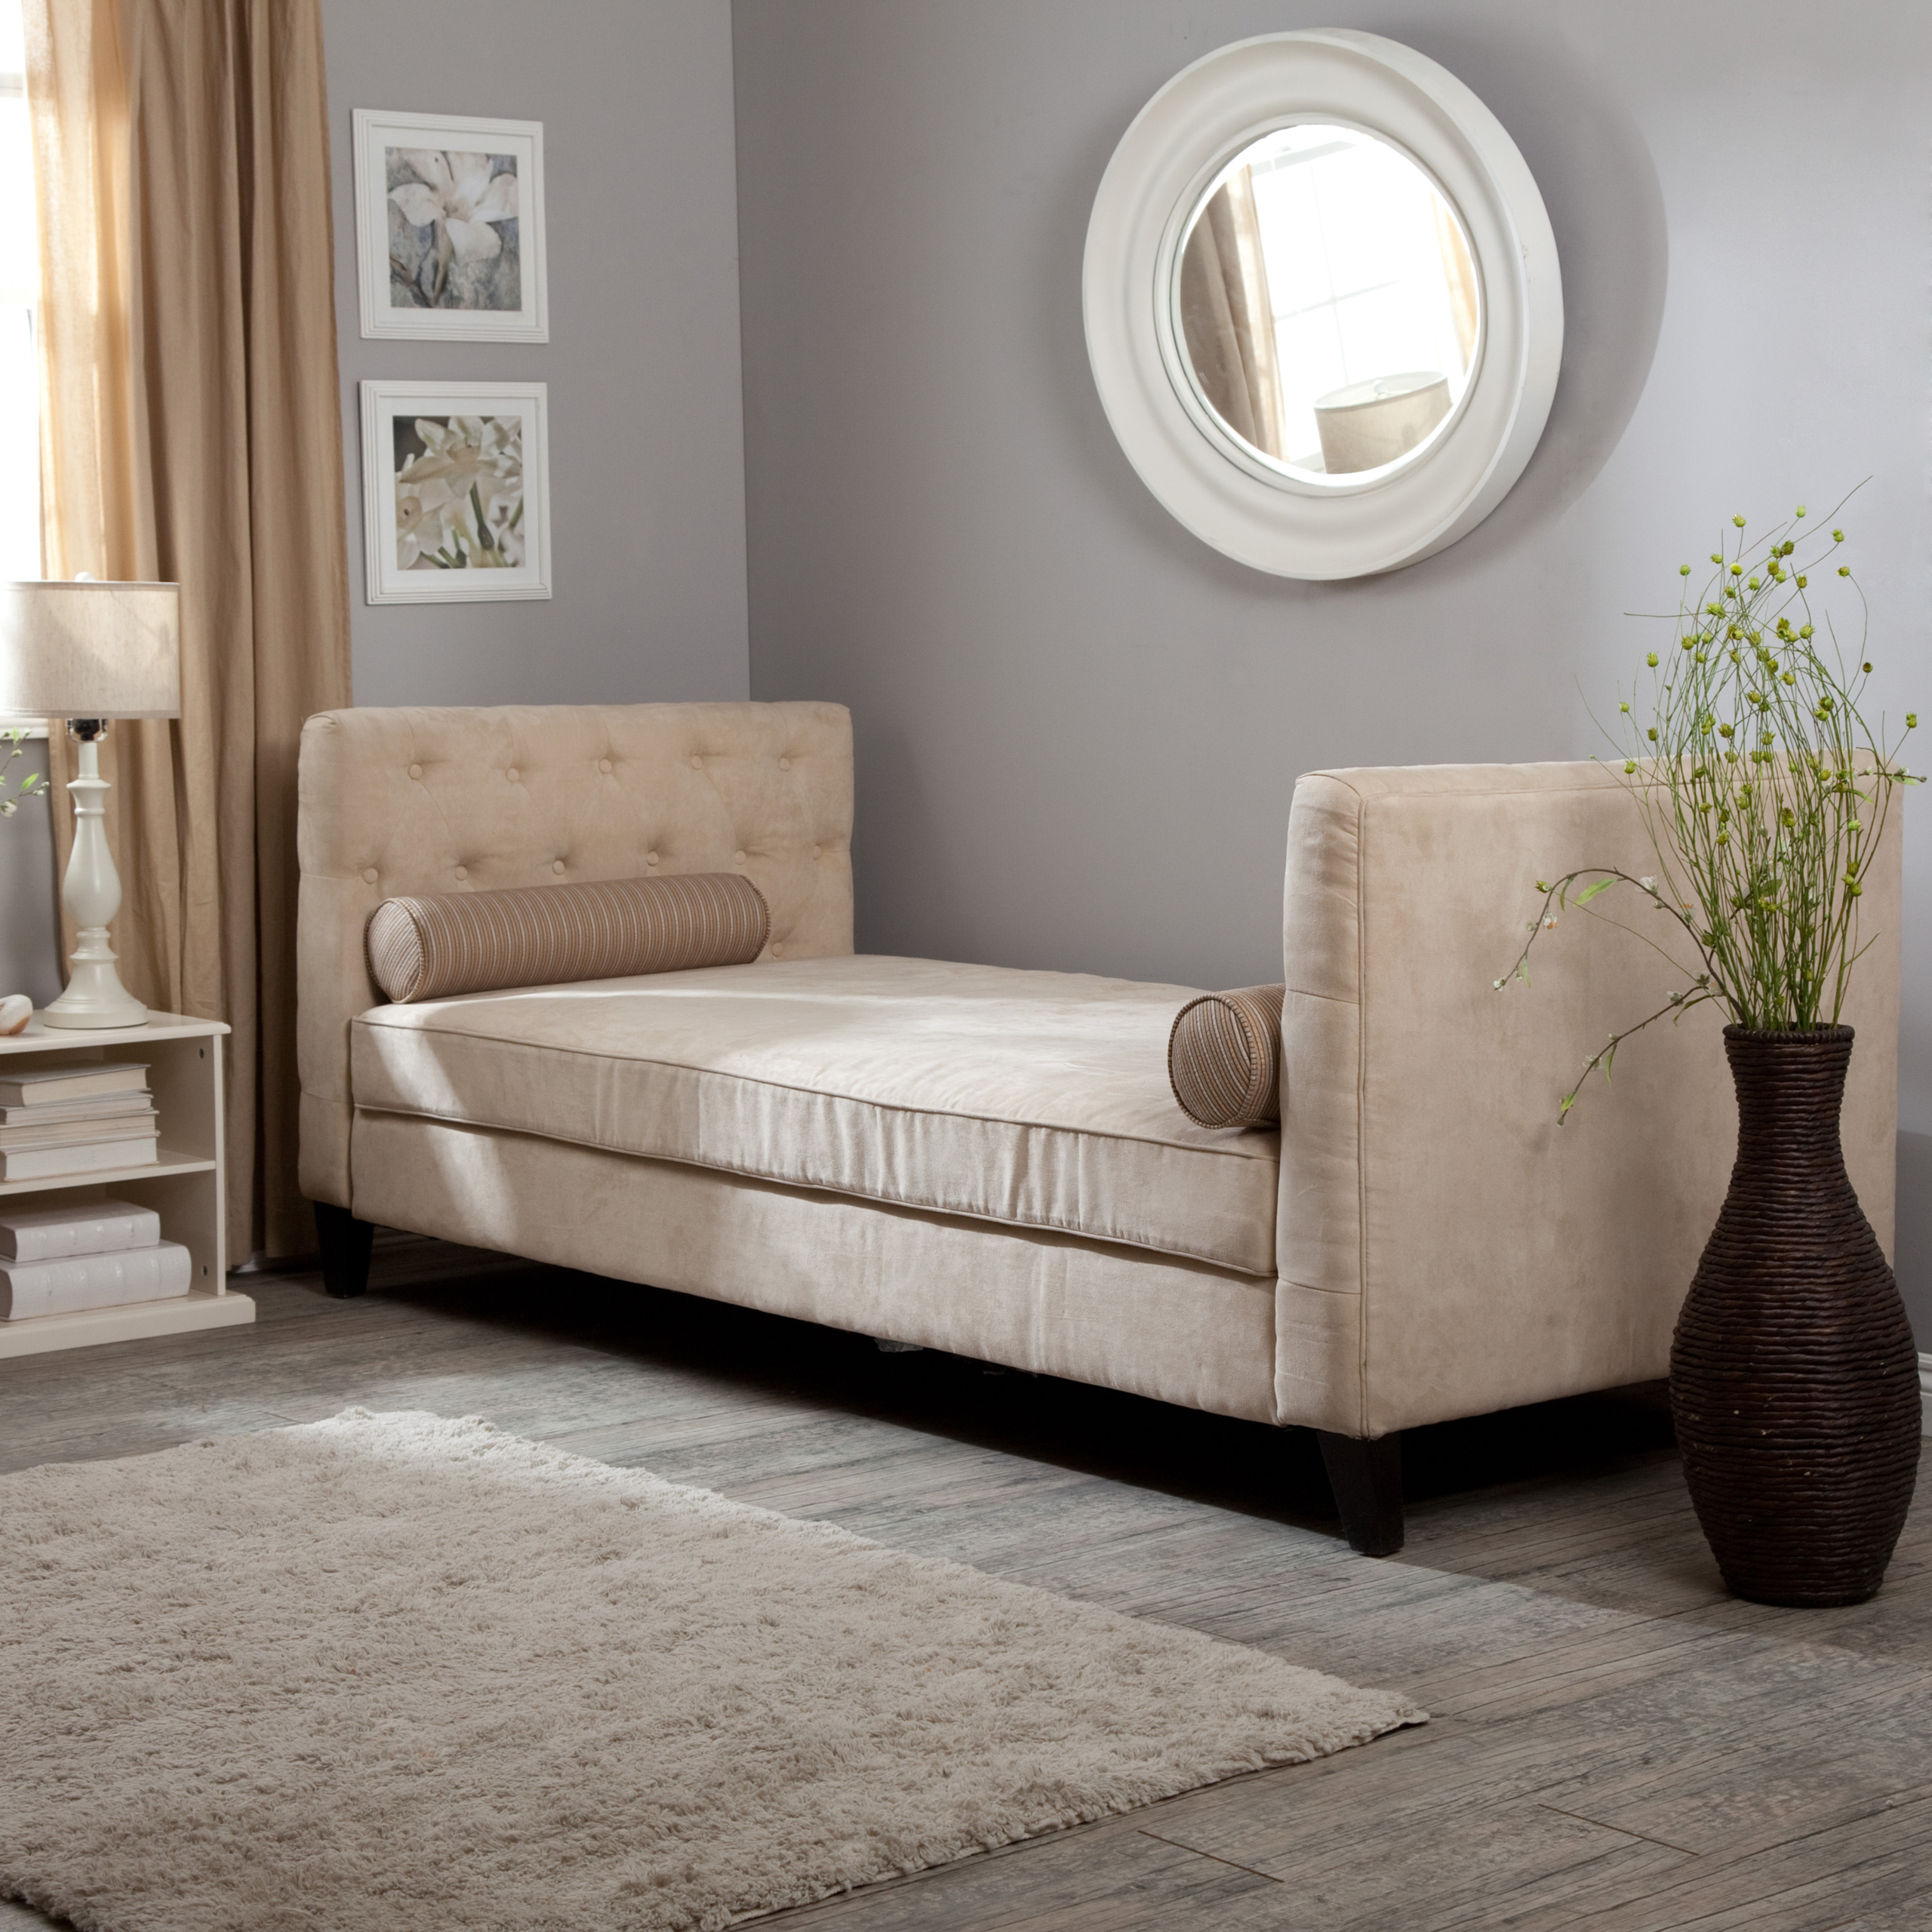 Backless chaise lounge 1